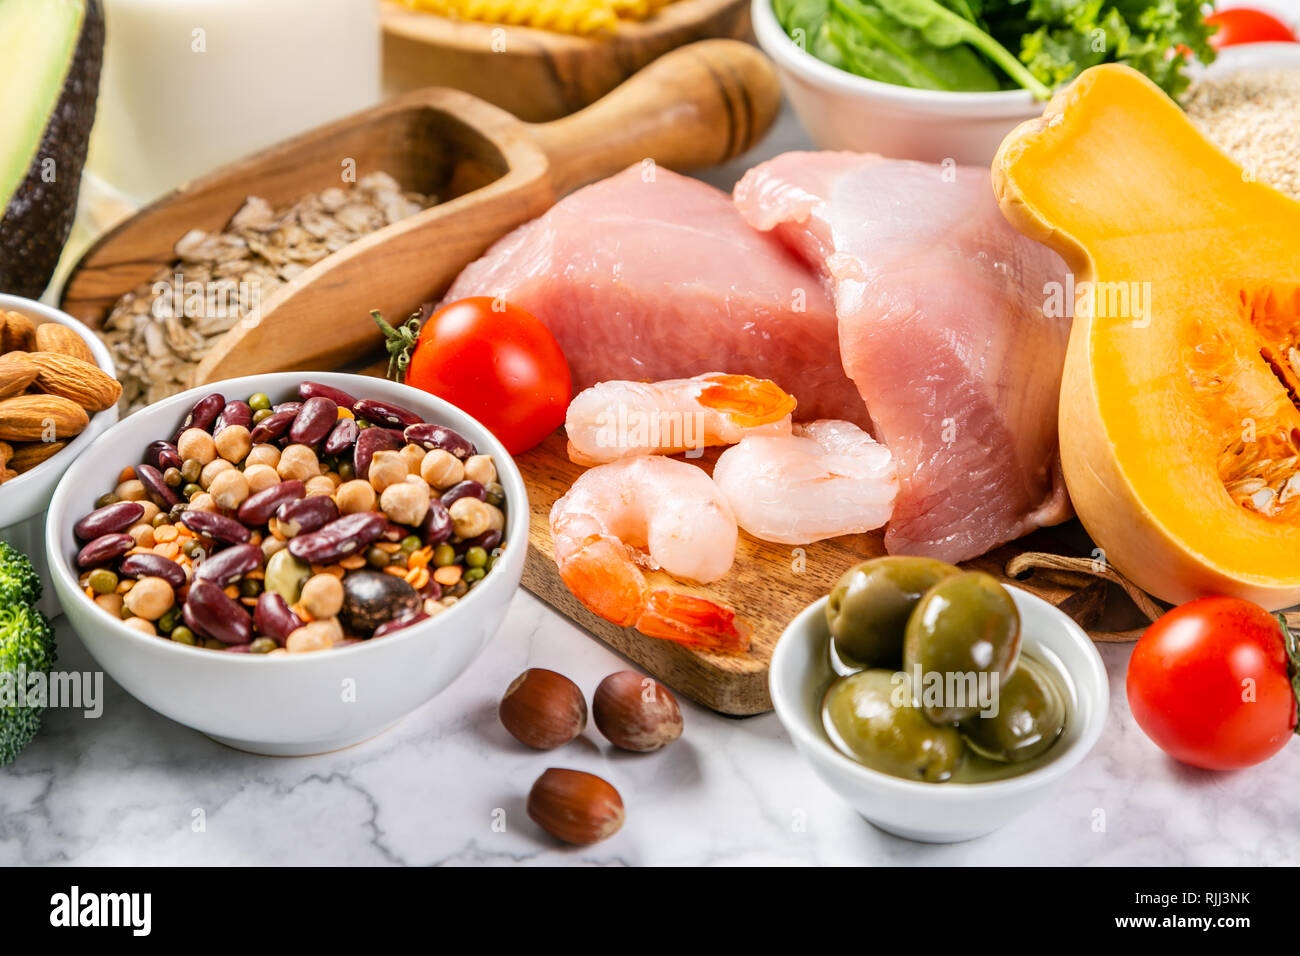 Mediterranean diet concept - meat, fish, fruits and vegetables Stock Photo